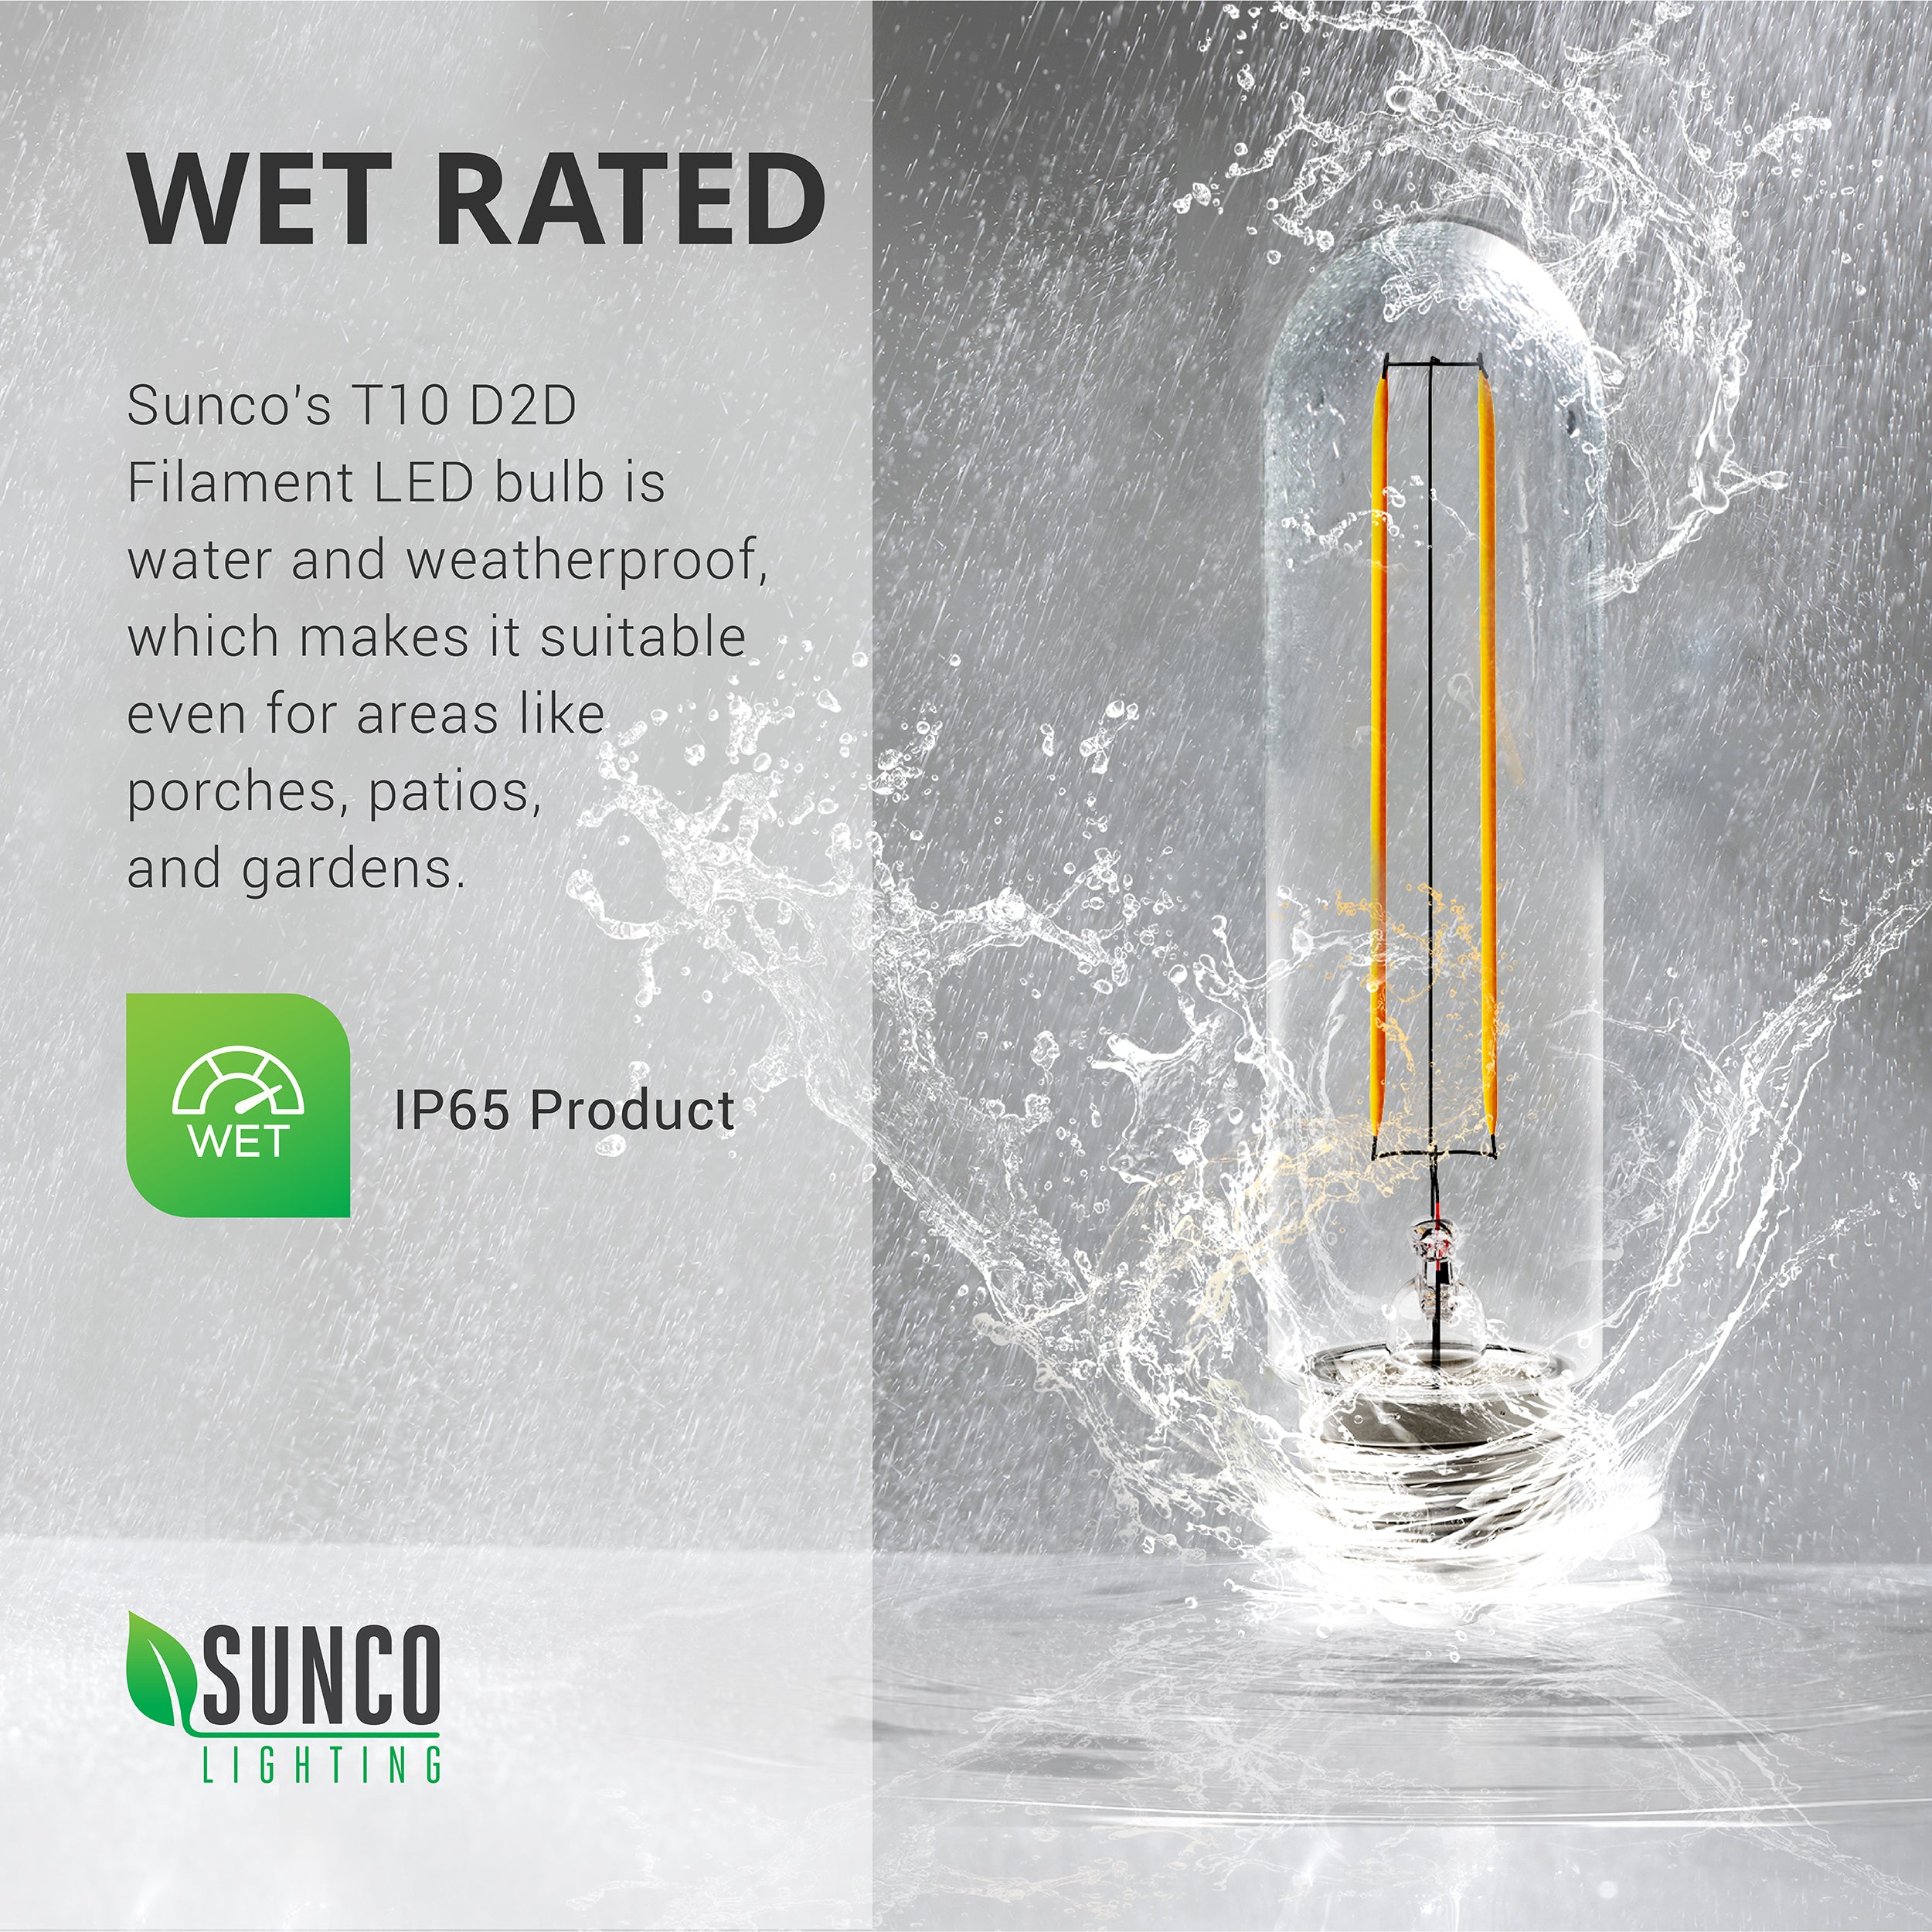 Wet Rated. Sunco’s T10 LED Filament Bulb with Dusk to Dawn is water and weatherproof. It is suitable for areas like porches, patios, and gardens. The product is rated IP65. Bulb is seen here being splashed by rain. Wet Rating refers to rain splashing and not submerging the light bulb. See our blogs on IP Ratings and on Wet Ratings for more information on this topic.